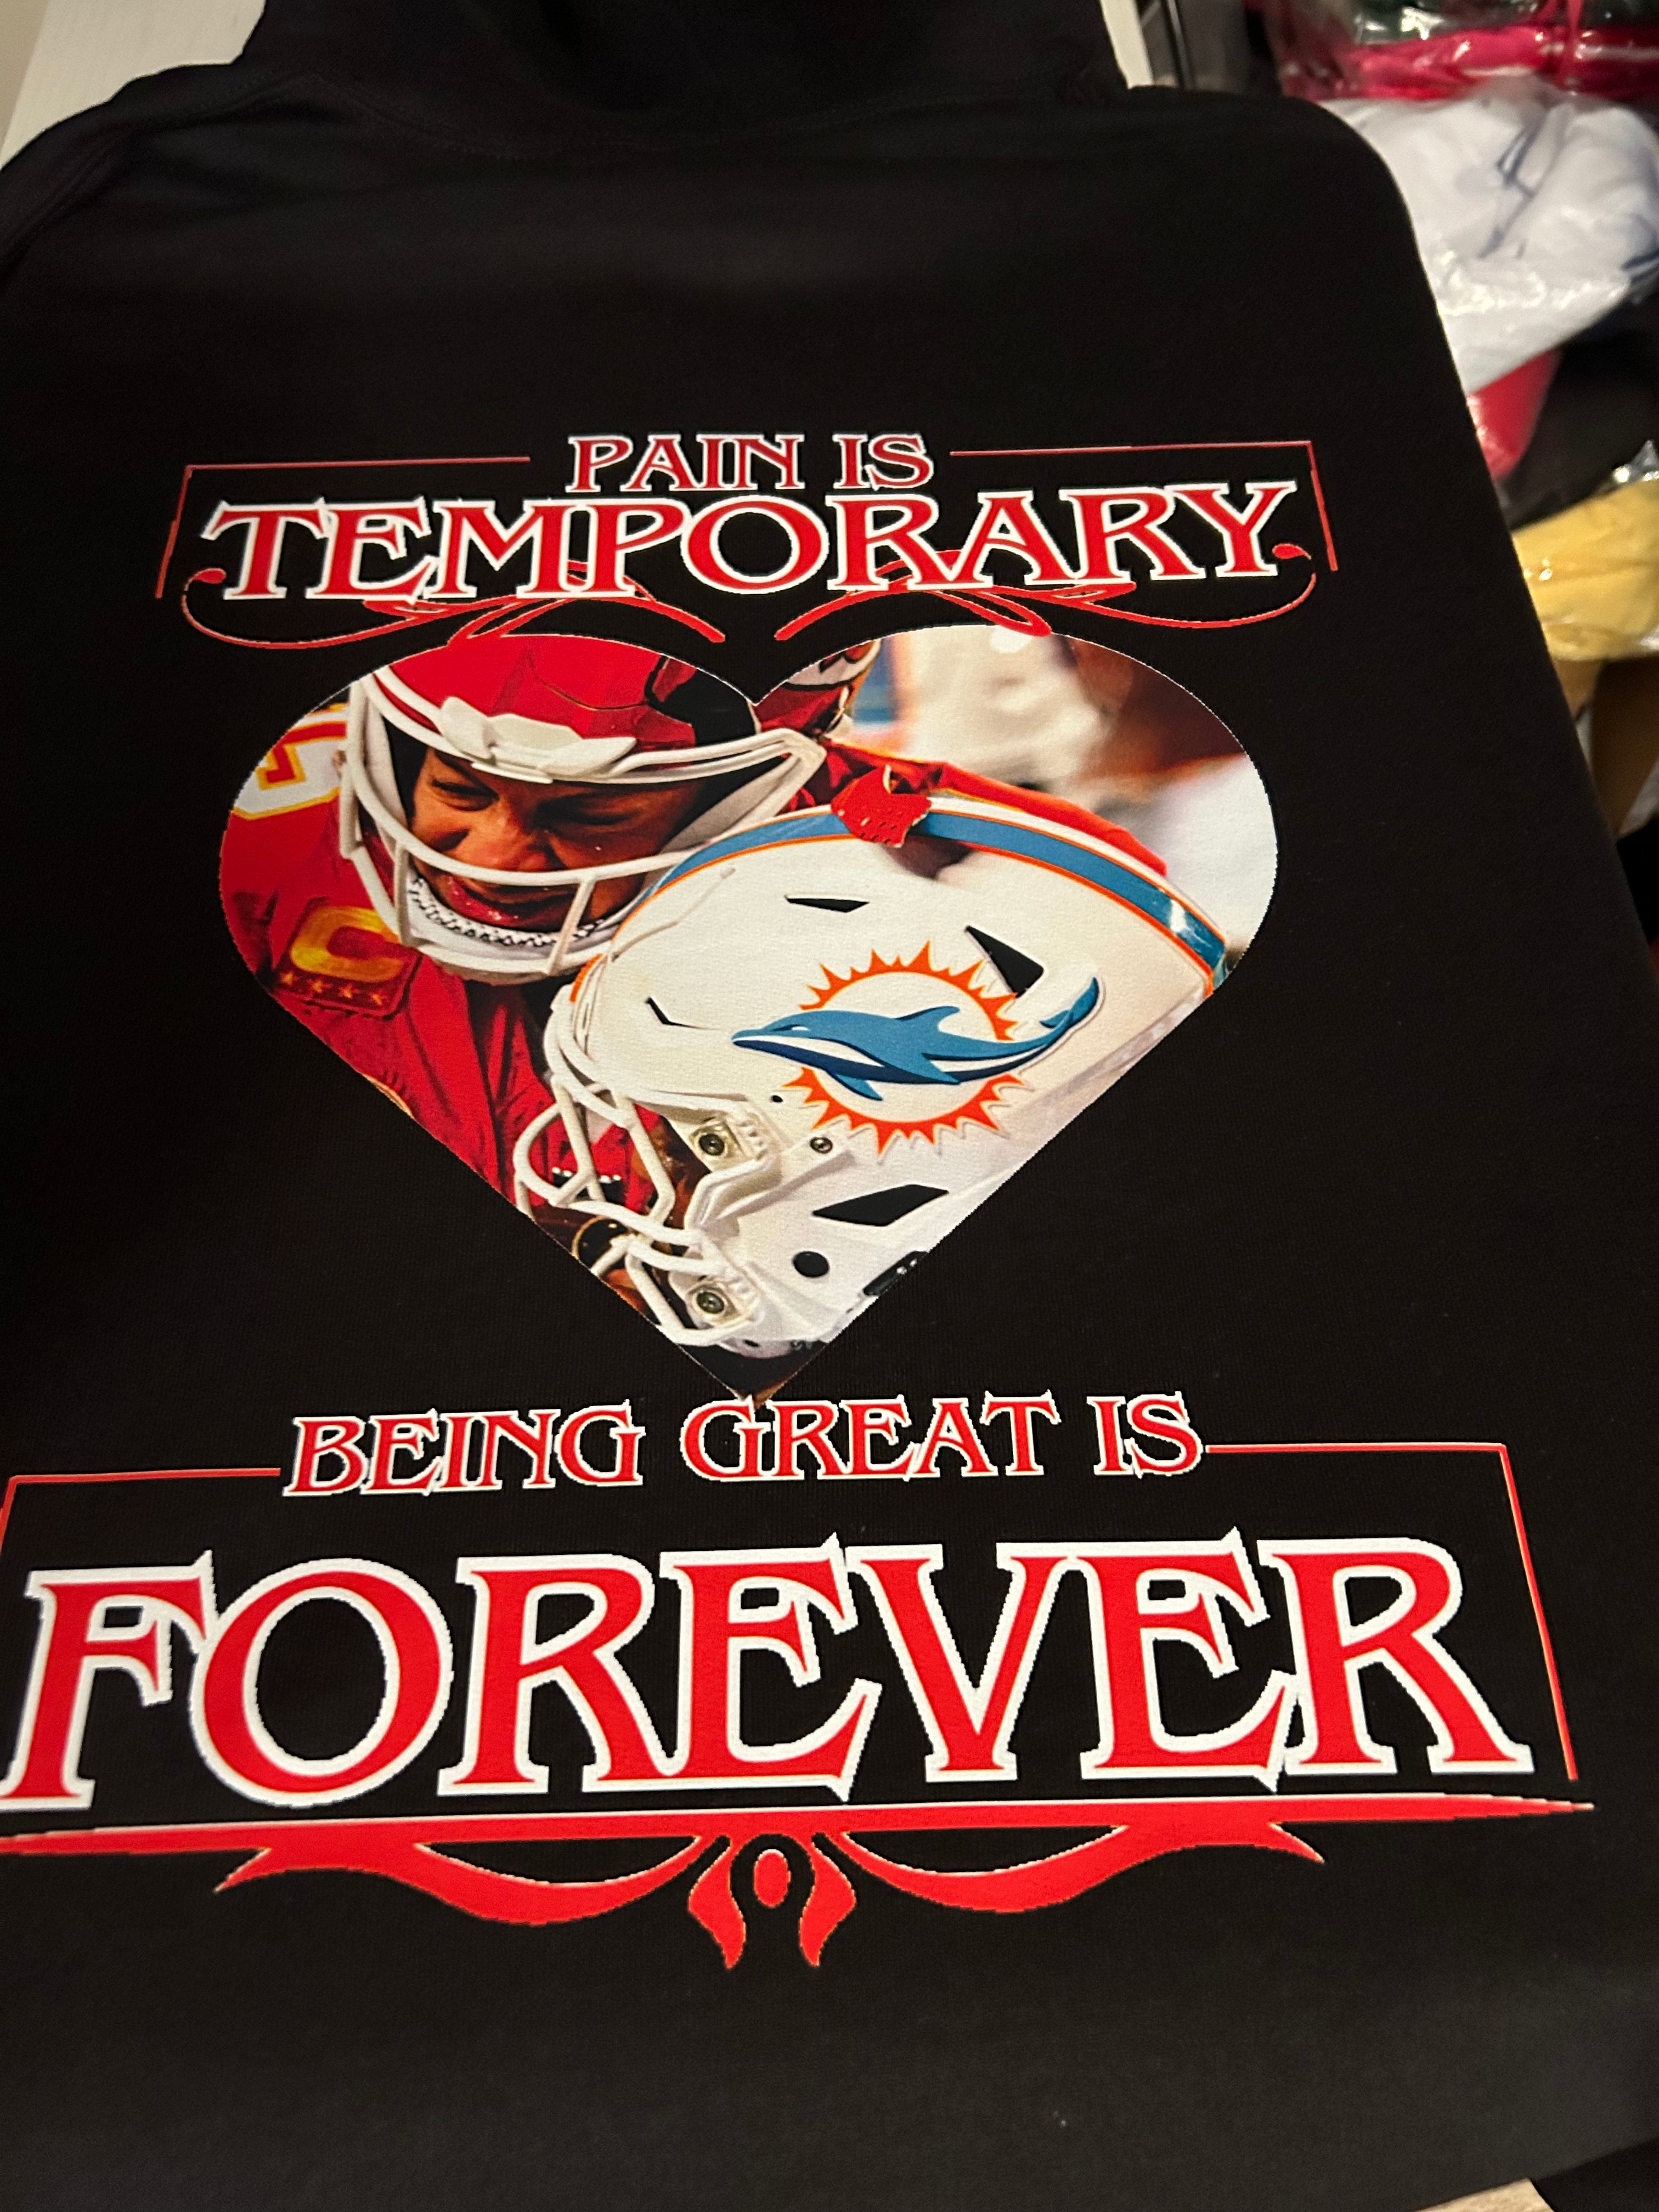 Pain is temporary being great is forever hoodies